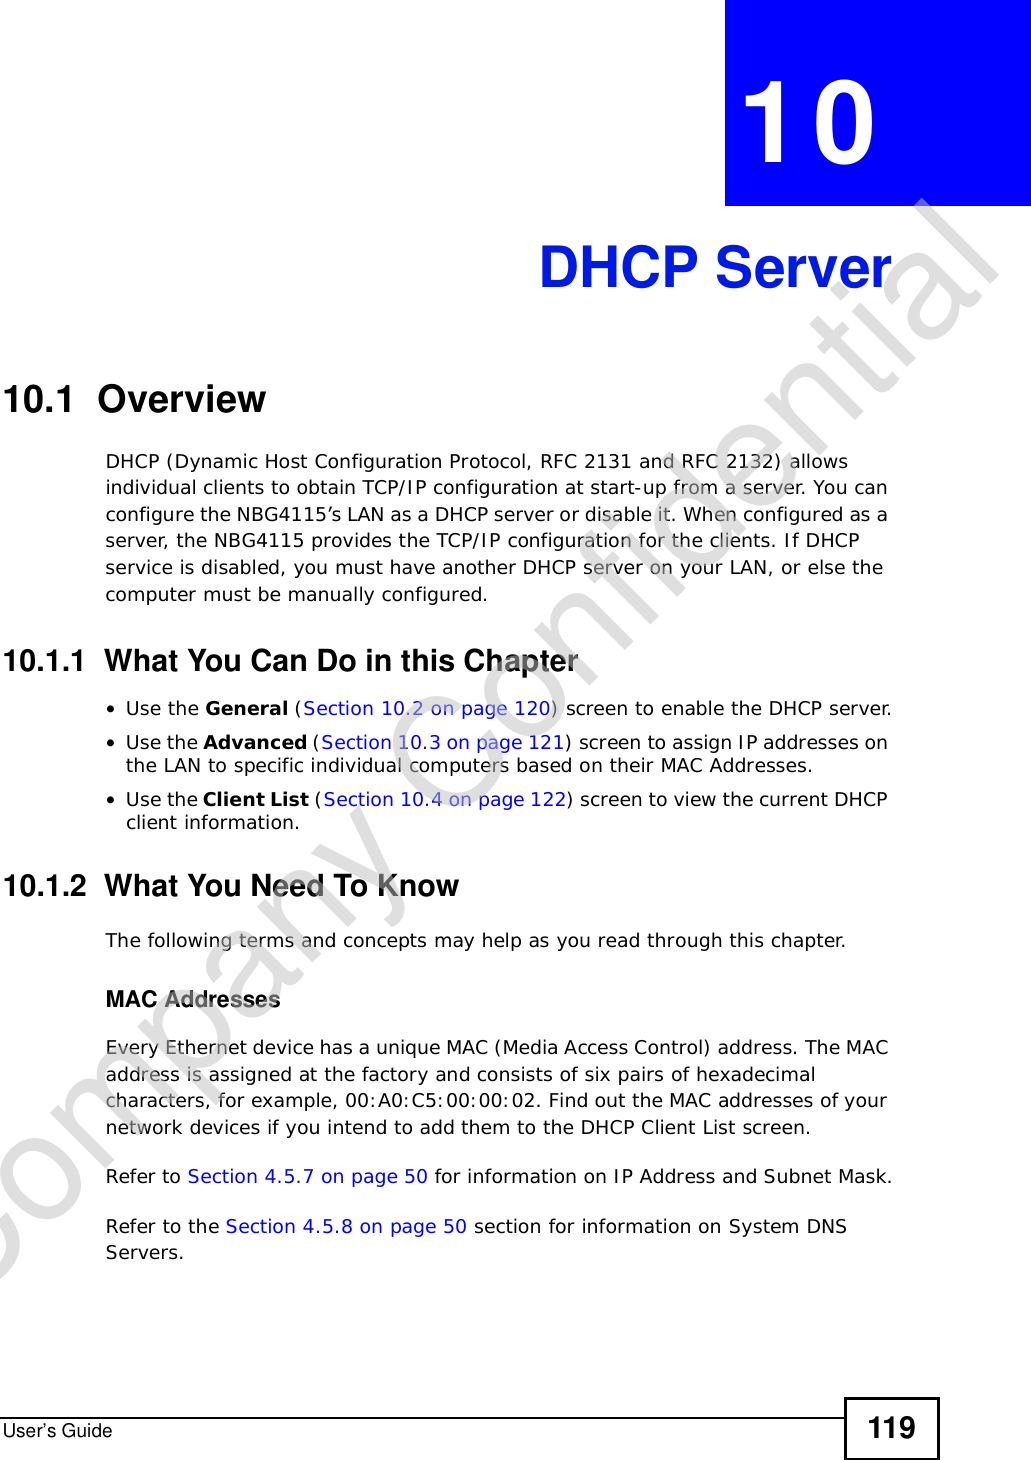 User’s Guide 119CHAPTER 10DHCP Server10.1  OverviewDHCP (Dynamic Host Configuration Protocol, RFC 2131 and RFC 2132) allows individual clients to obtain TCP/IP configuration at start-up from a server. You can configure the NBG4115’s LAN as a DHCP server or disable it. When configured as a server, the NBG4115 provides the TCP/IP configuration for the clients. If DHCP service is disabled, you must have another DHCP server on your LAN, or else the computer must be manually configured.10.1.1  What You Can Do in this Chapter•Use the General (Section 10.2 on page 120) screen to enable the DHCP server.•Use the Advanced (Section 10.3 on page 121) screen to assign IP addresses on the LAN to specific individual computers based on their MAC Addresses.•Use the Client List (Section 10.4 on page 122) screen to view the current DHCP client information. 10.1.2  What You Need To KnowThe following terms and concepts may help as you read through this chapter.MAC AddressesEvery Ethernet device has a unique MAC (Media Access Control) address. The MAC address is assigned at the factory and consists of six pairs of hexadecimal characters, for example, 00:A0:C5:00:00:02. Find out the MAC addresses of your network devices if you intend to add them to the DHCP Client List screen.Refer to Section 4.5.7 on page 50 for information on IP Address and Subnet Mask.Refer to the Section 4.5.8 on page 50 section for information on System DNS Servers.Company Confidential